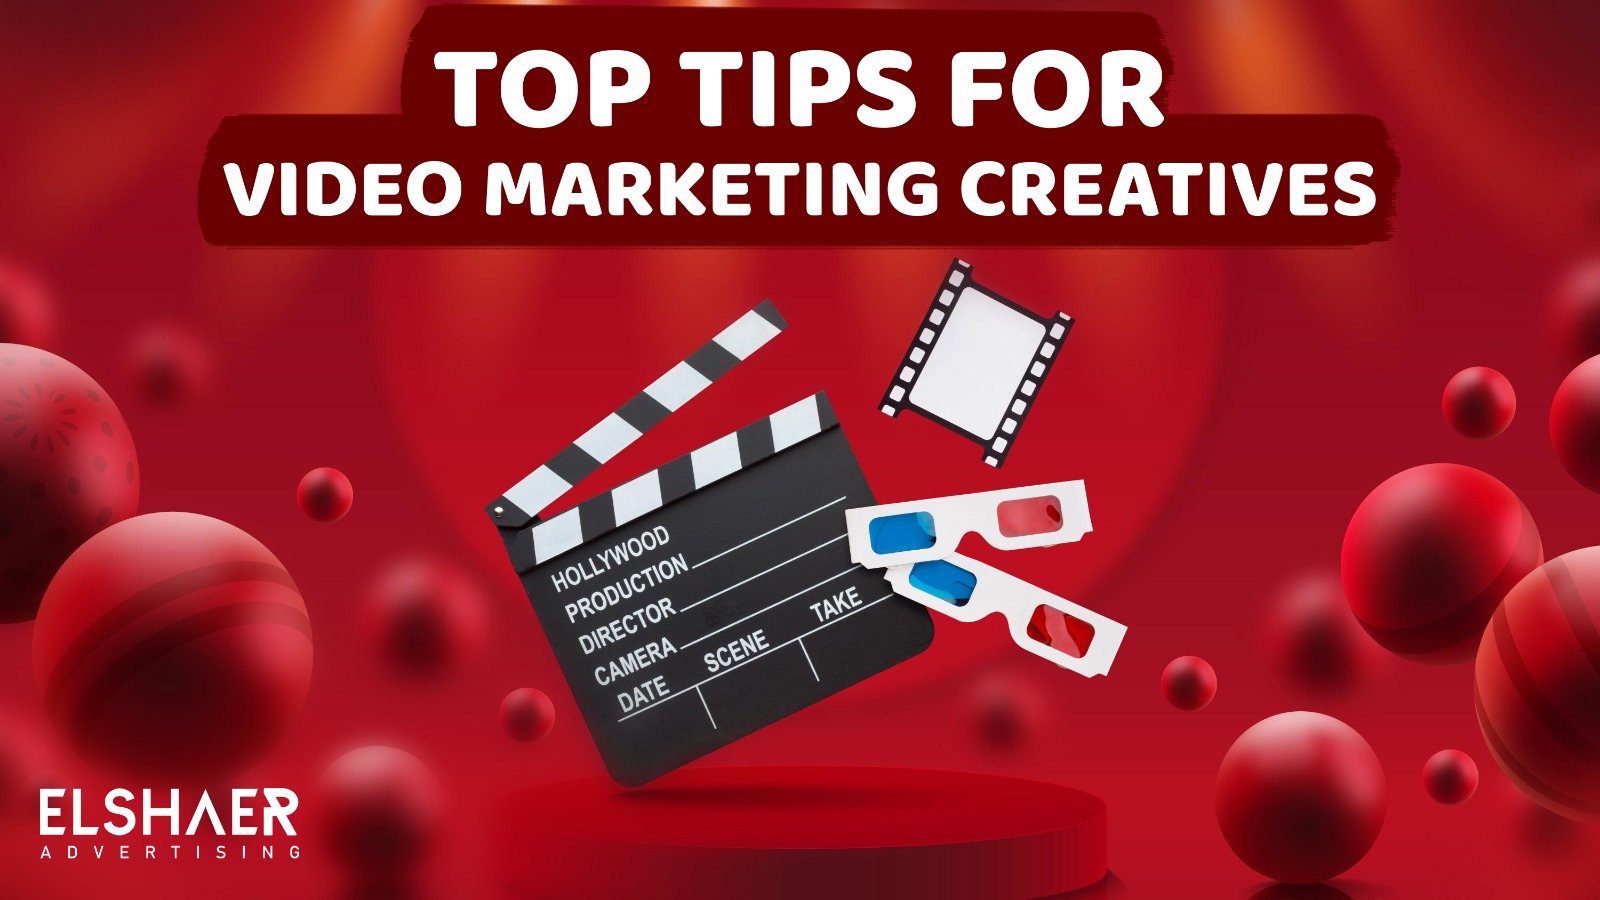 Top Tips for Video Marketing Creatives